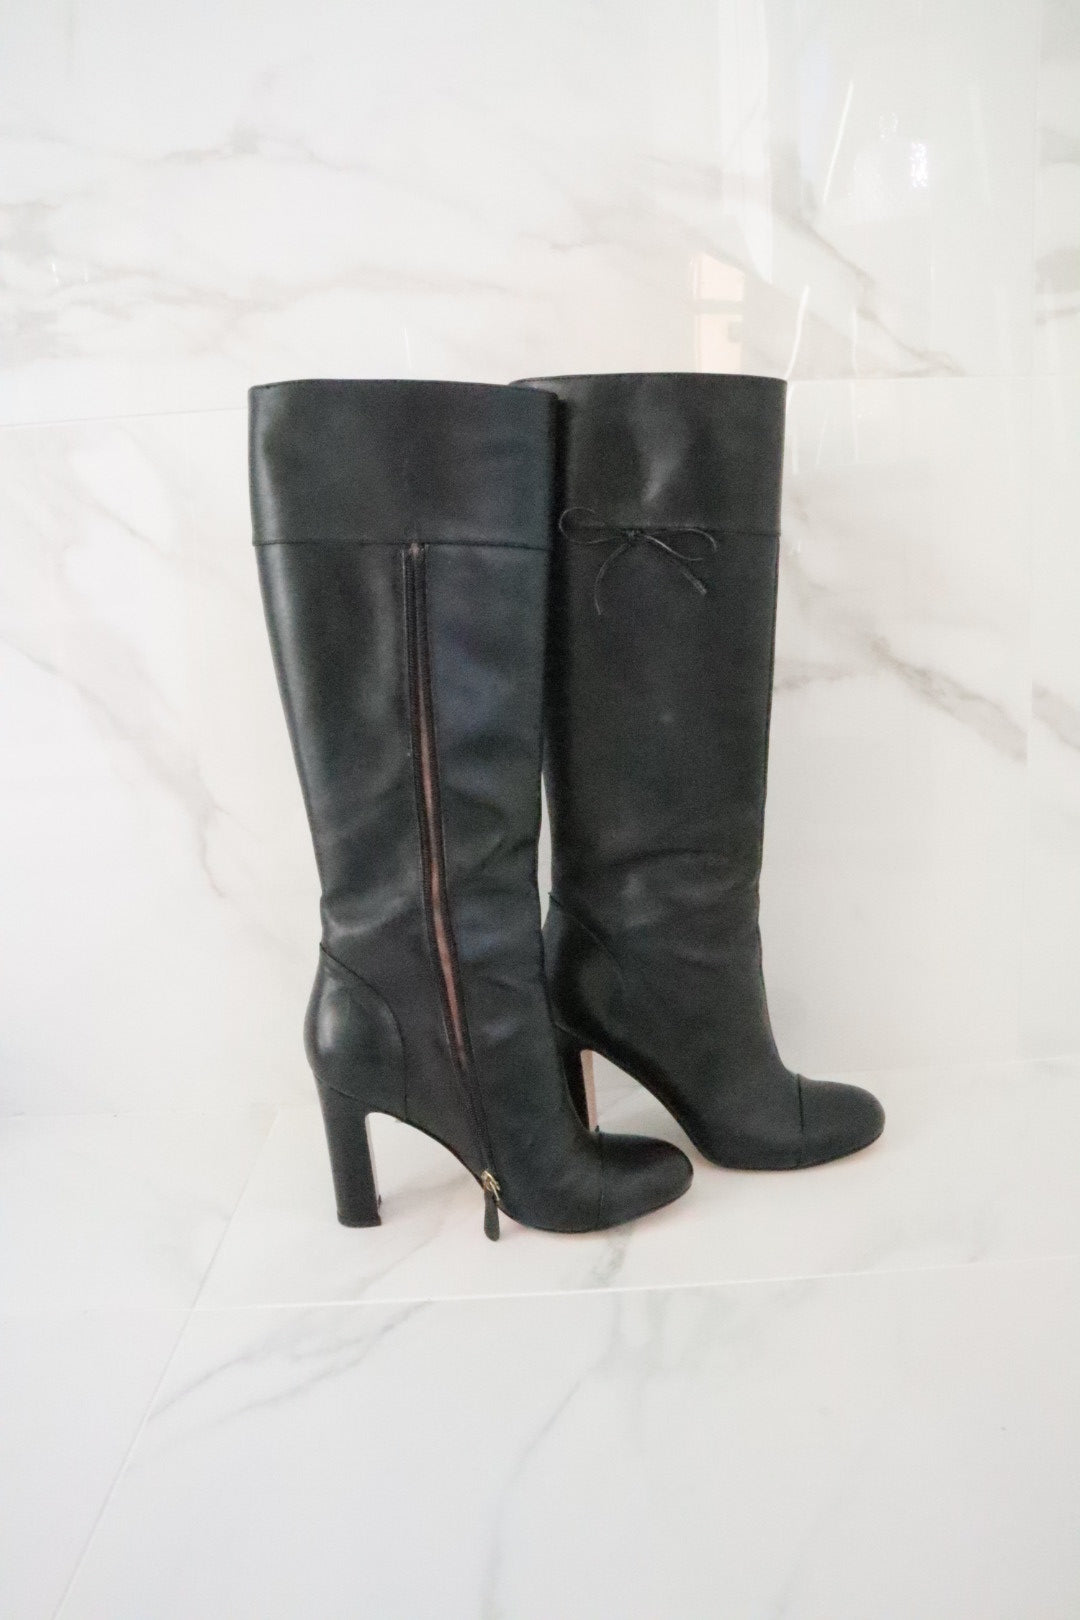 Red Valentino boots (38)